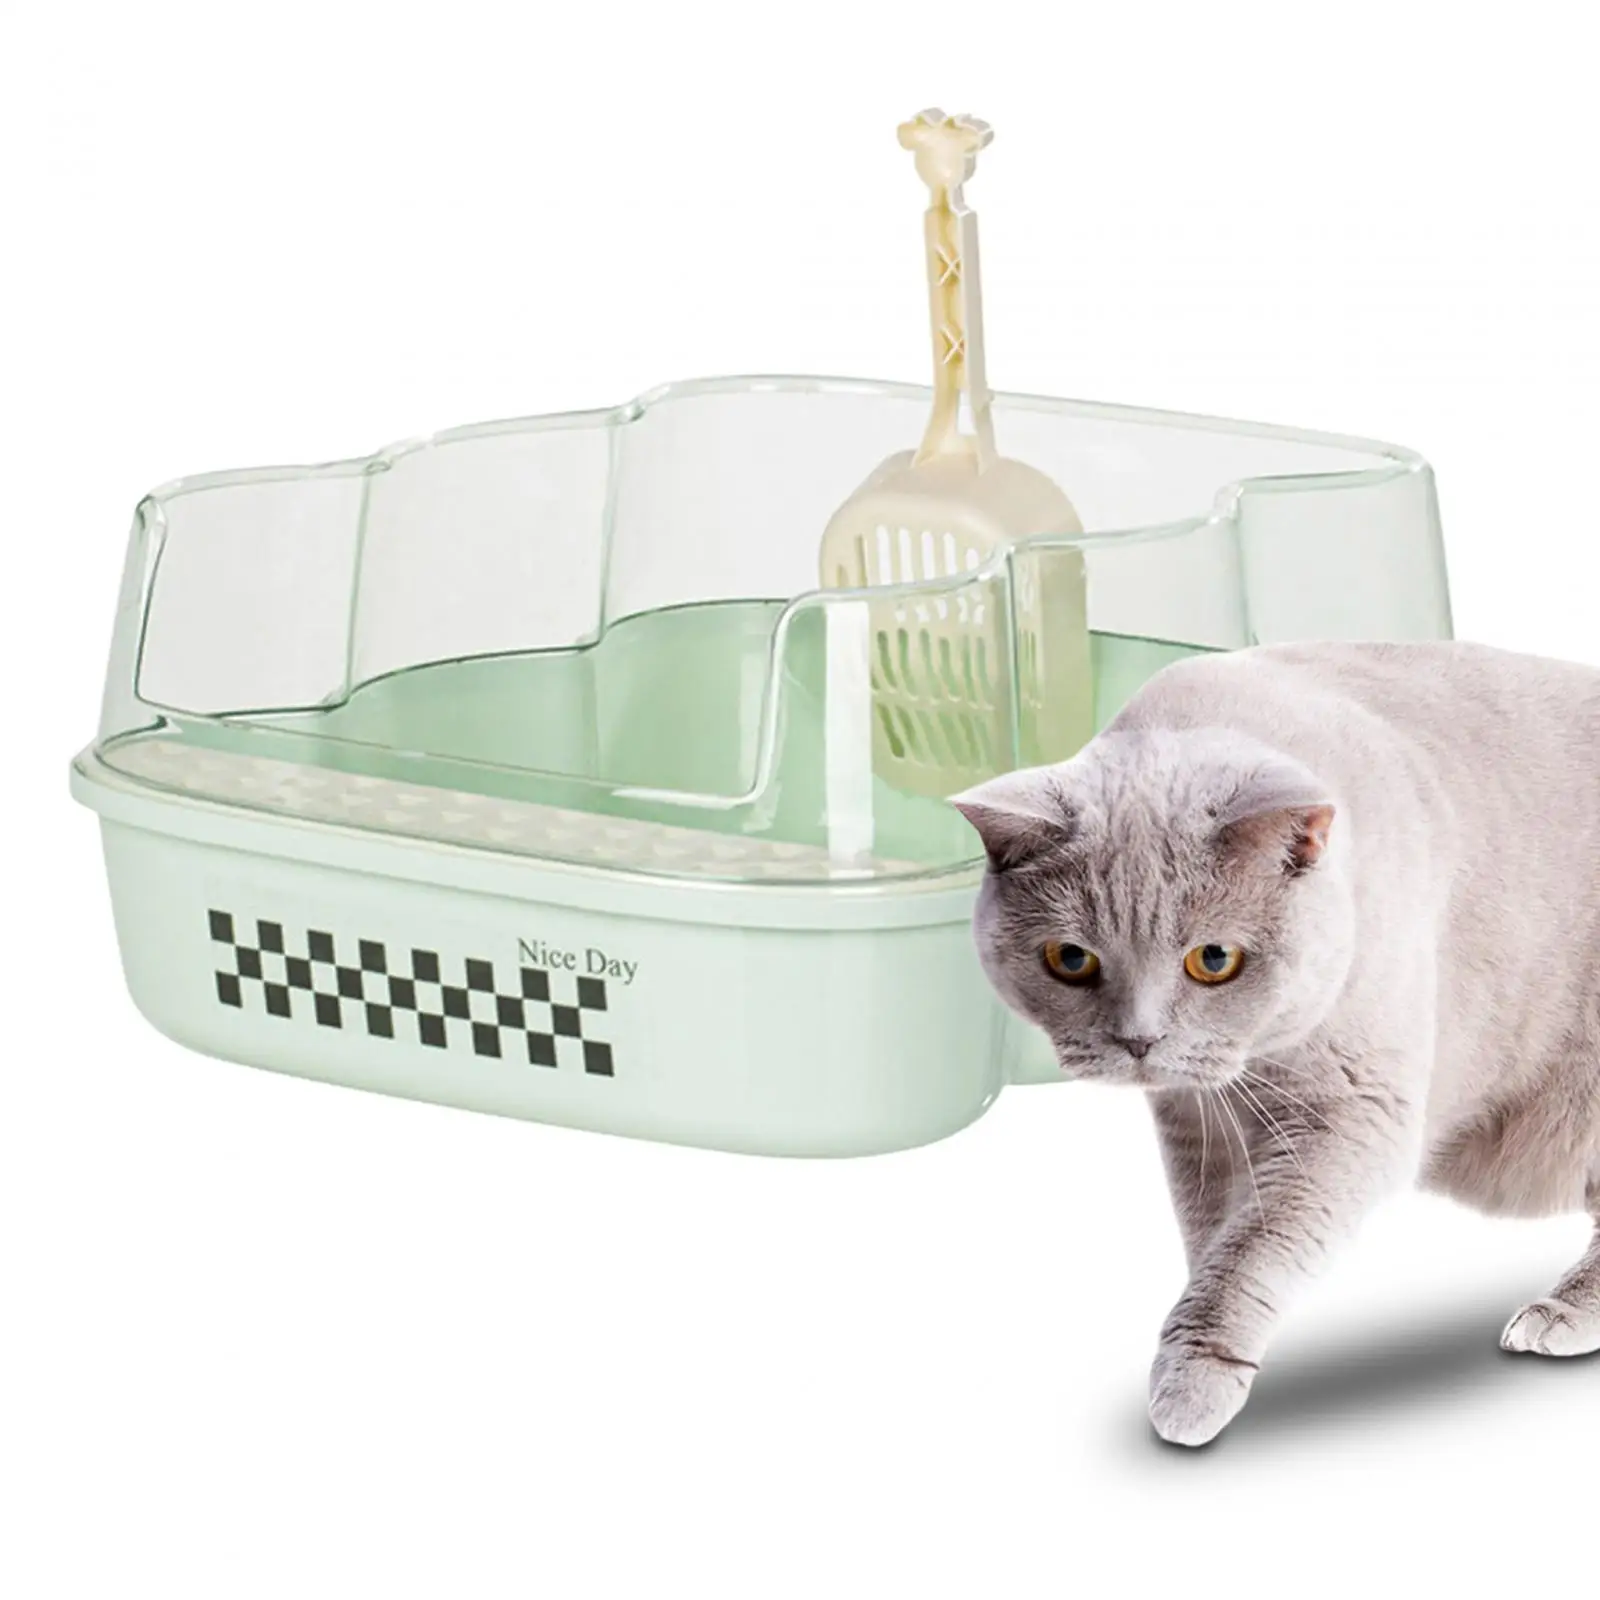 Cat Litter Box with High Side Durable Semi Enclosed Litter Box for Small Pet